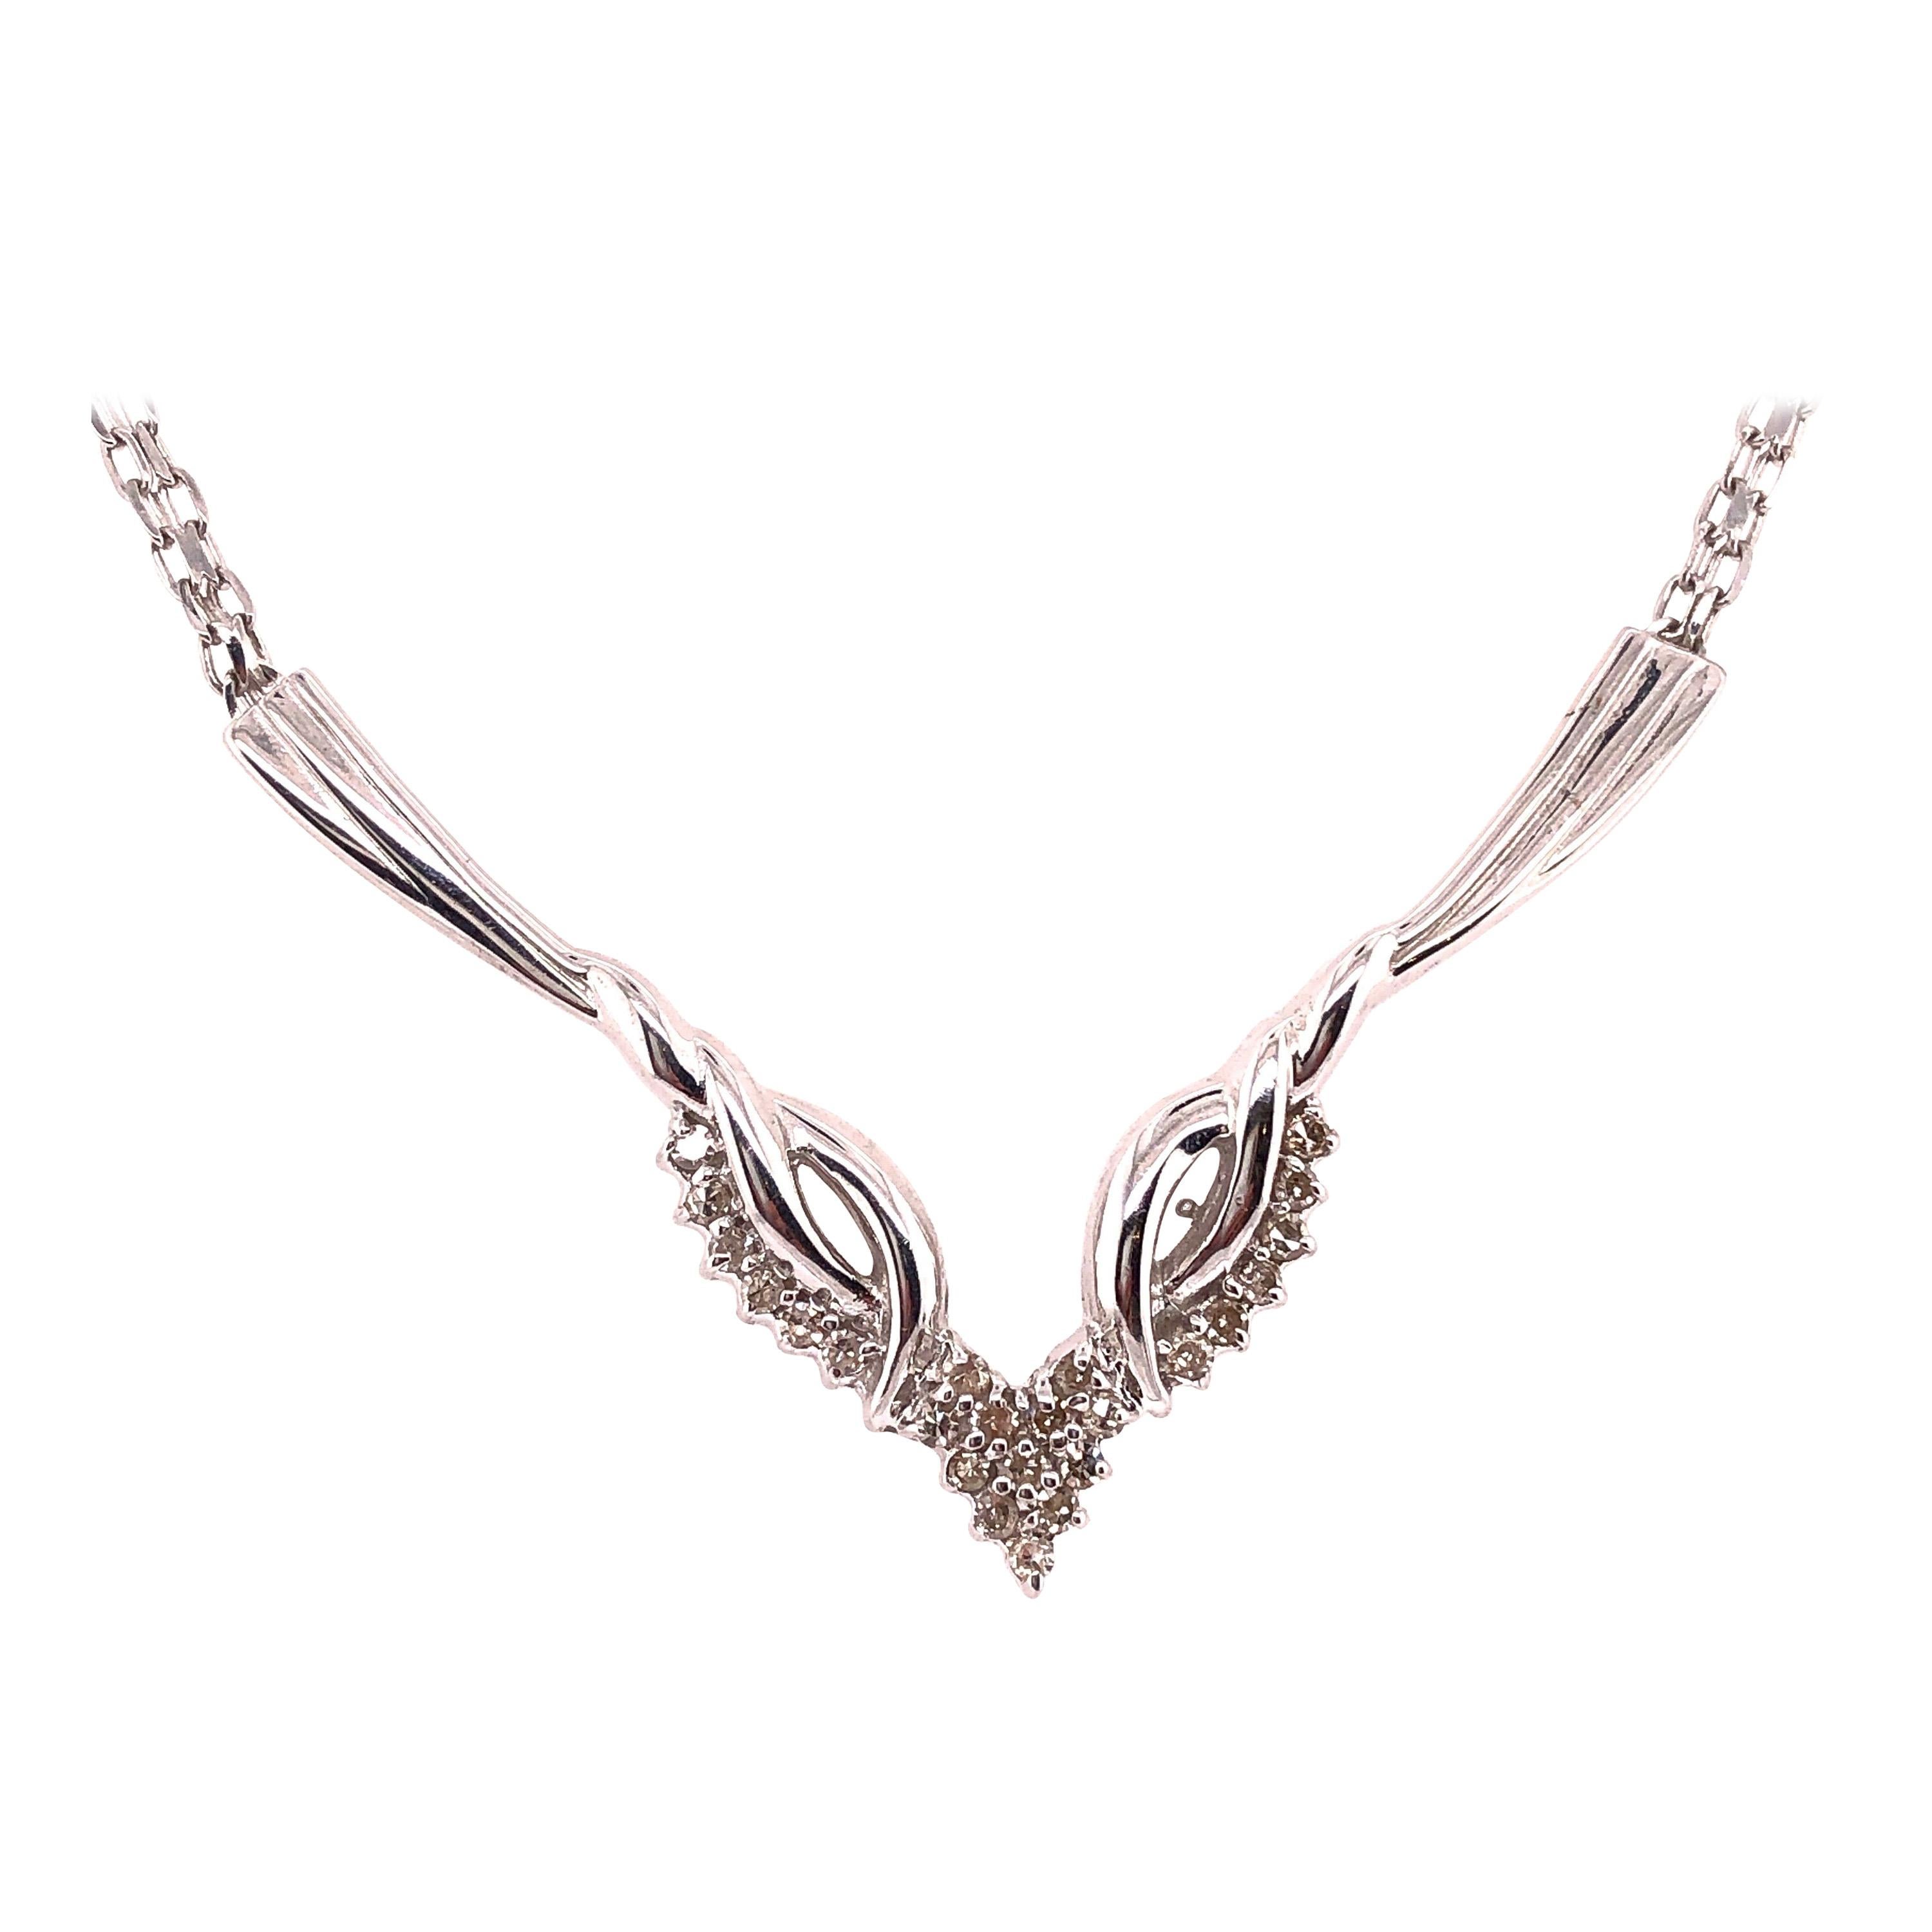 14 Karat White Gold Fancy Link Necklace With Soldered Diamond Pendant 